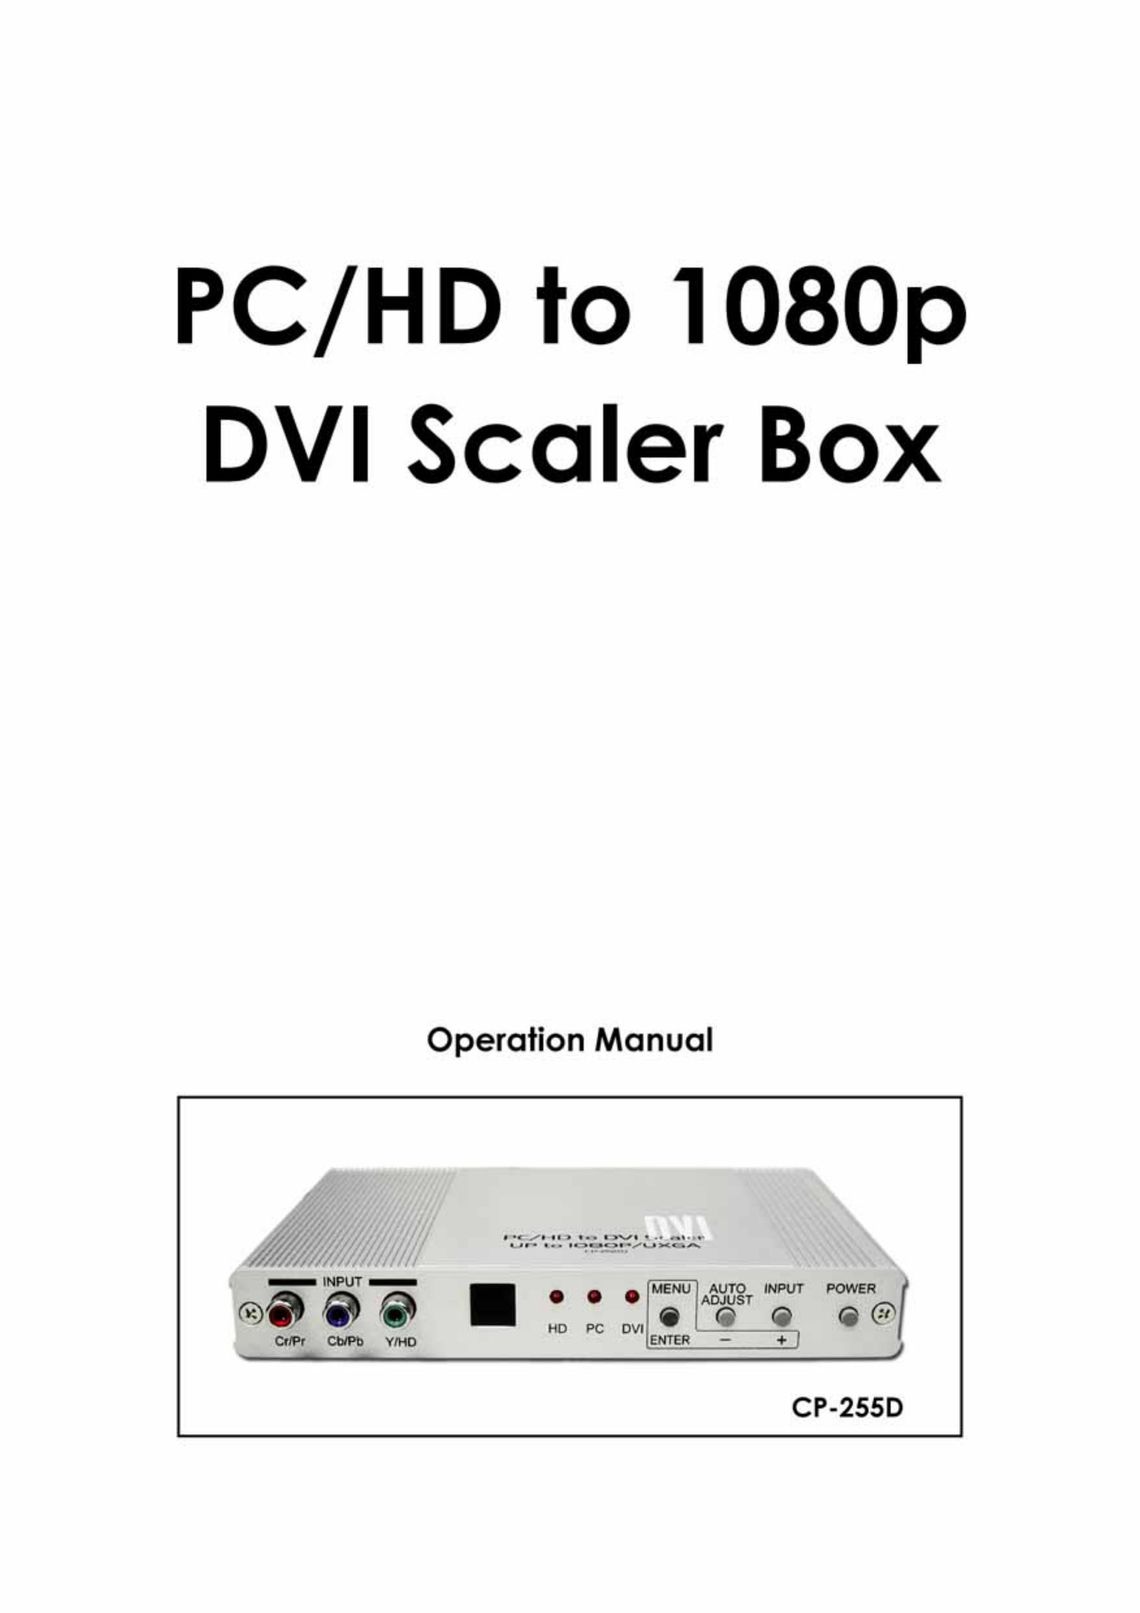 Video Products PCHD-DVI-SCALER Computer Hardware User Manual